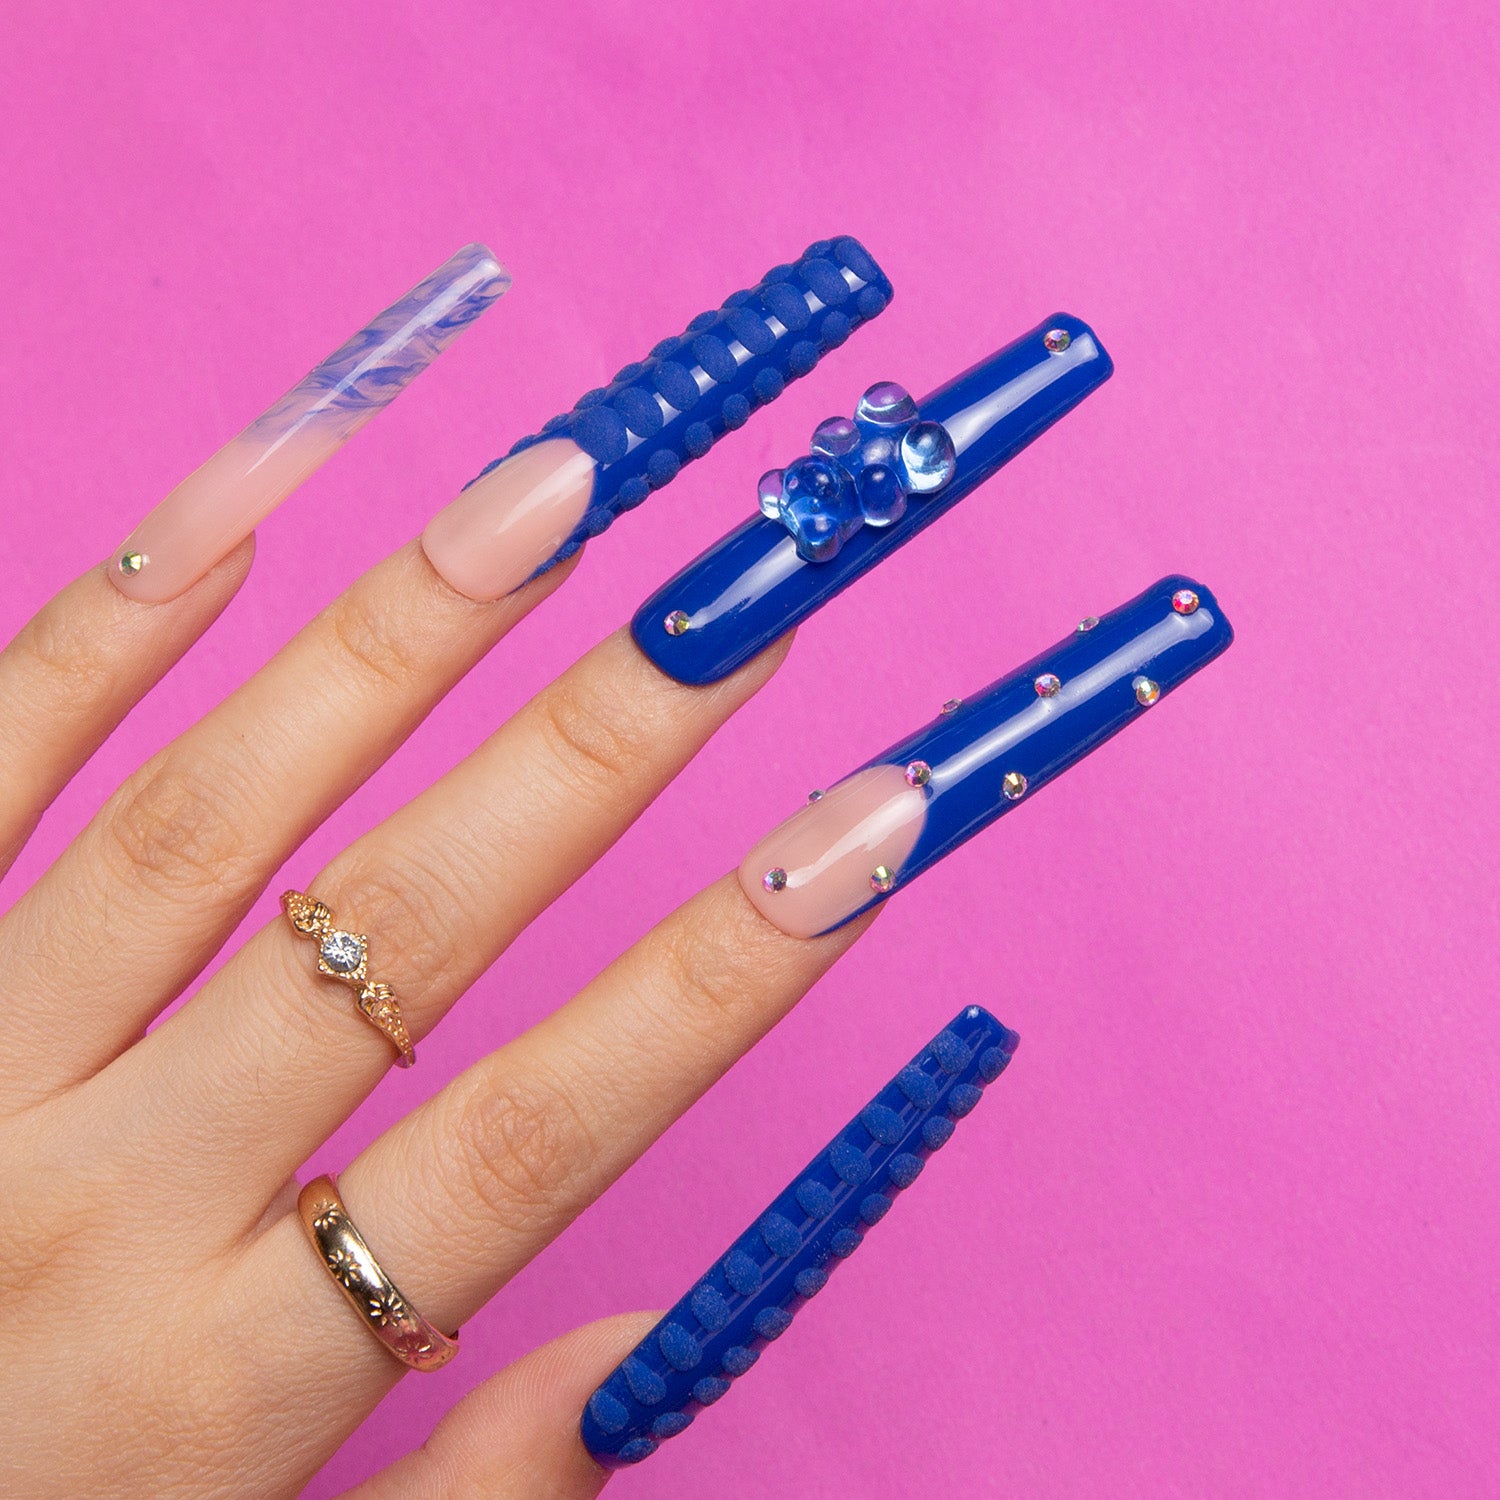 Hand with long square press-on nails in bright blue designs, adorned with French tips, rhinestones, and 3D gummy bear decorations, wearing gold and diamond rings.